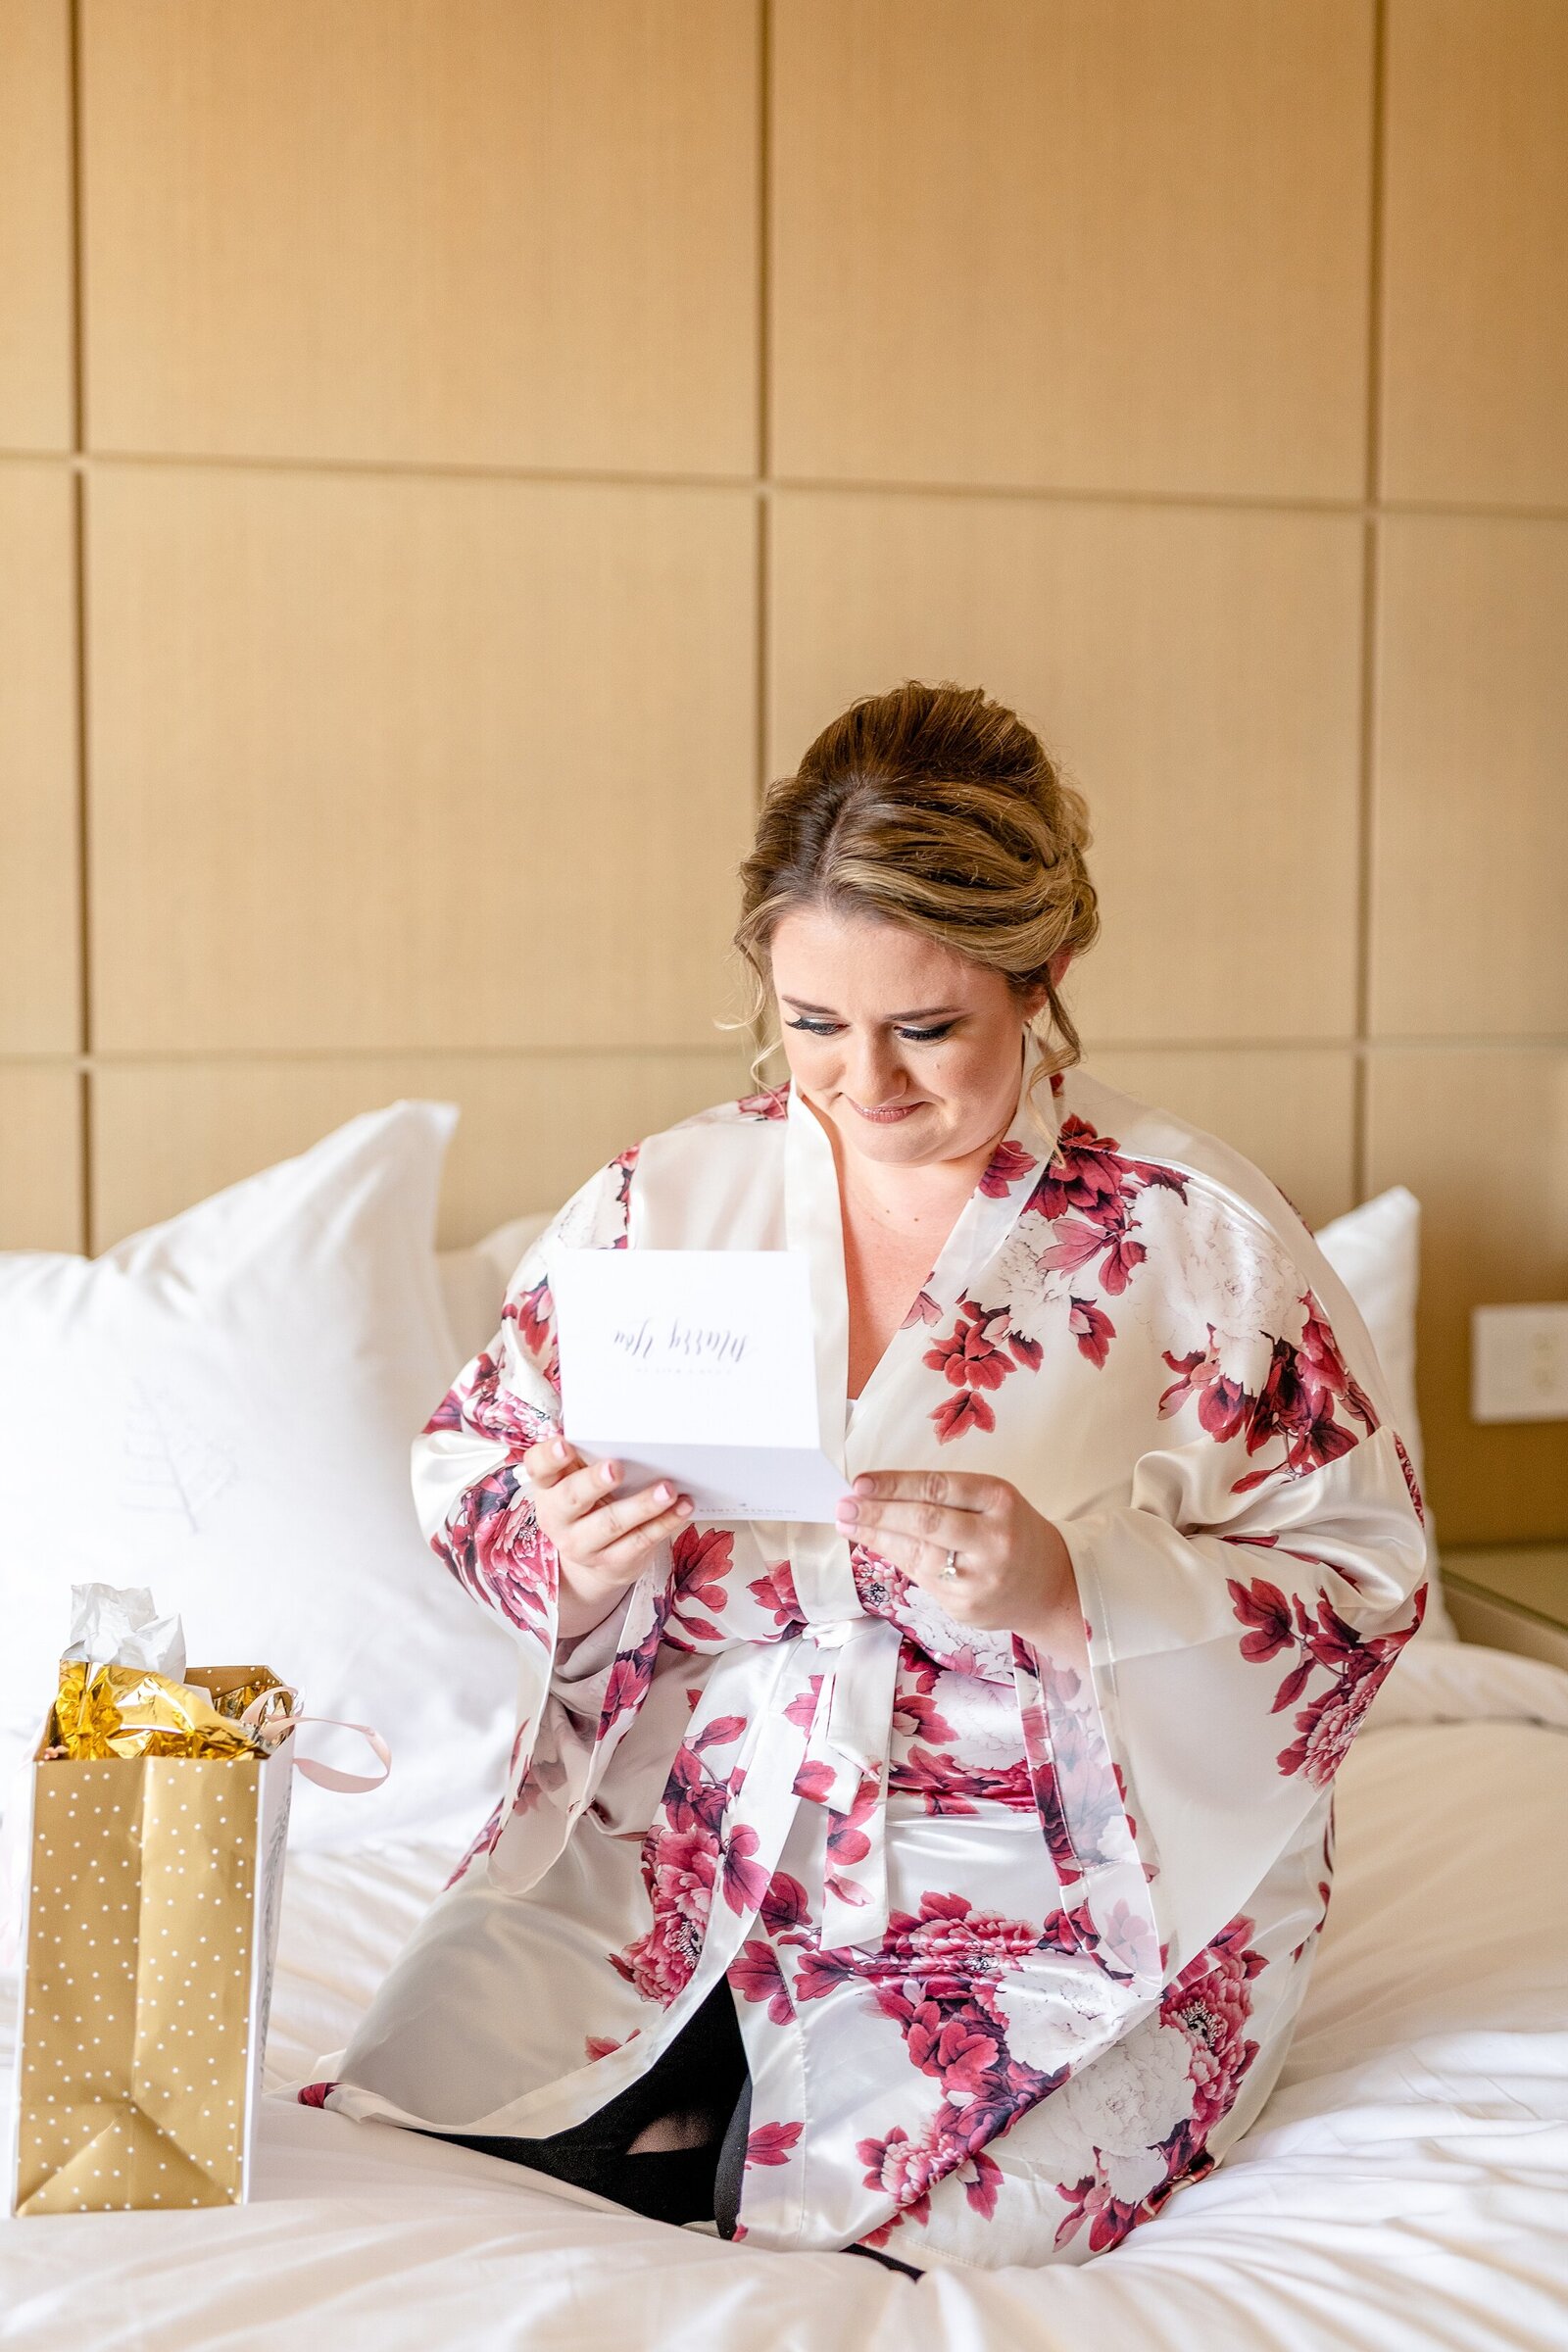 Bride opening gift on wedding day | Four Seasons Wedding | Chynna Pacheco Photography